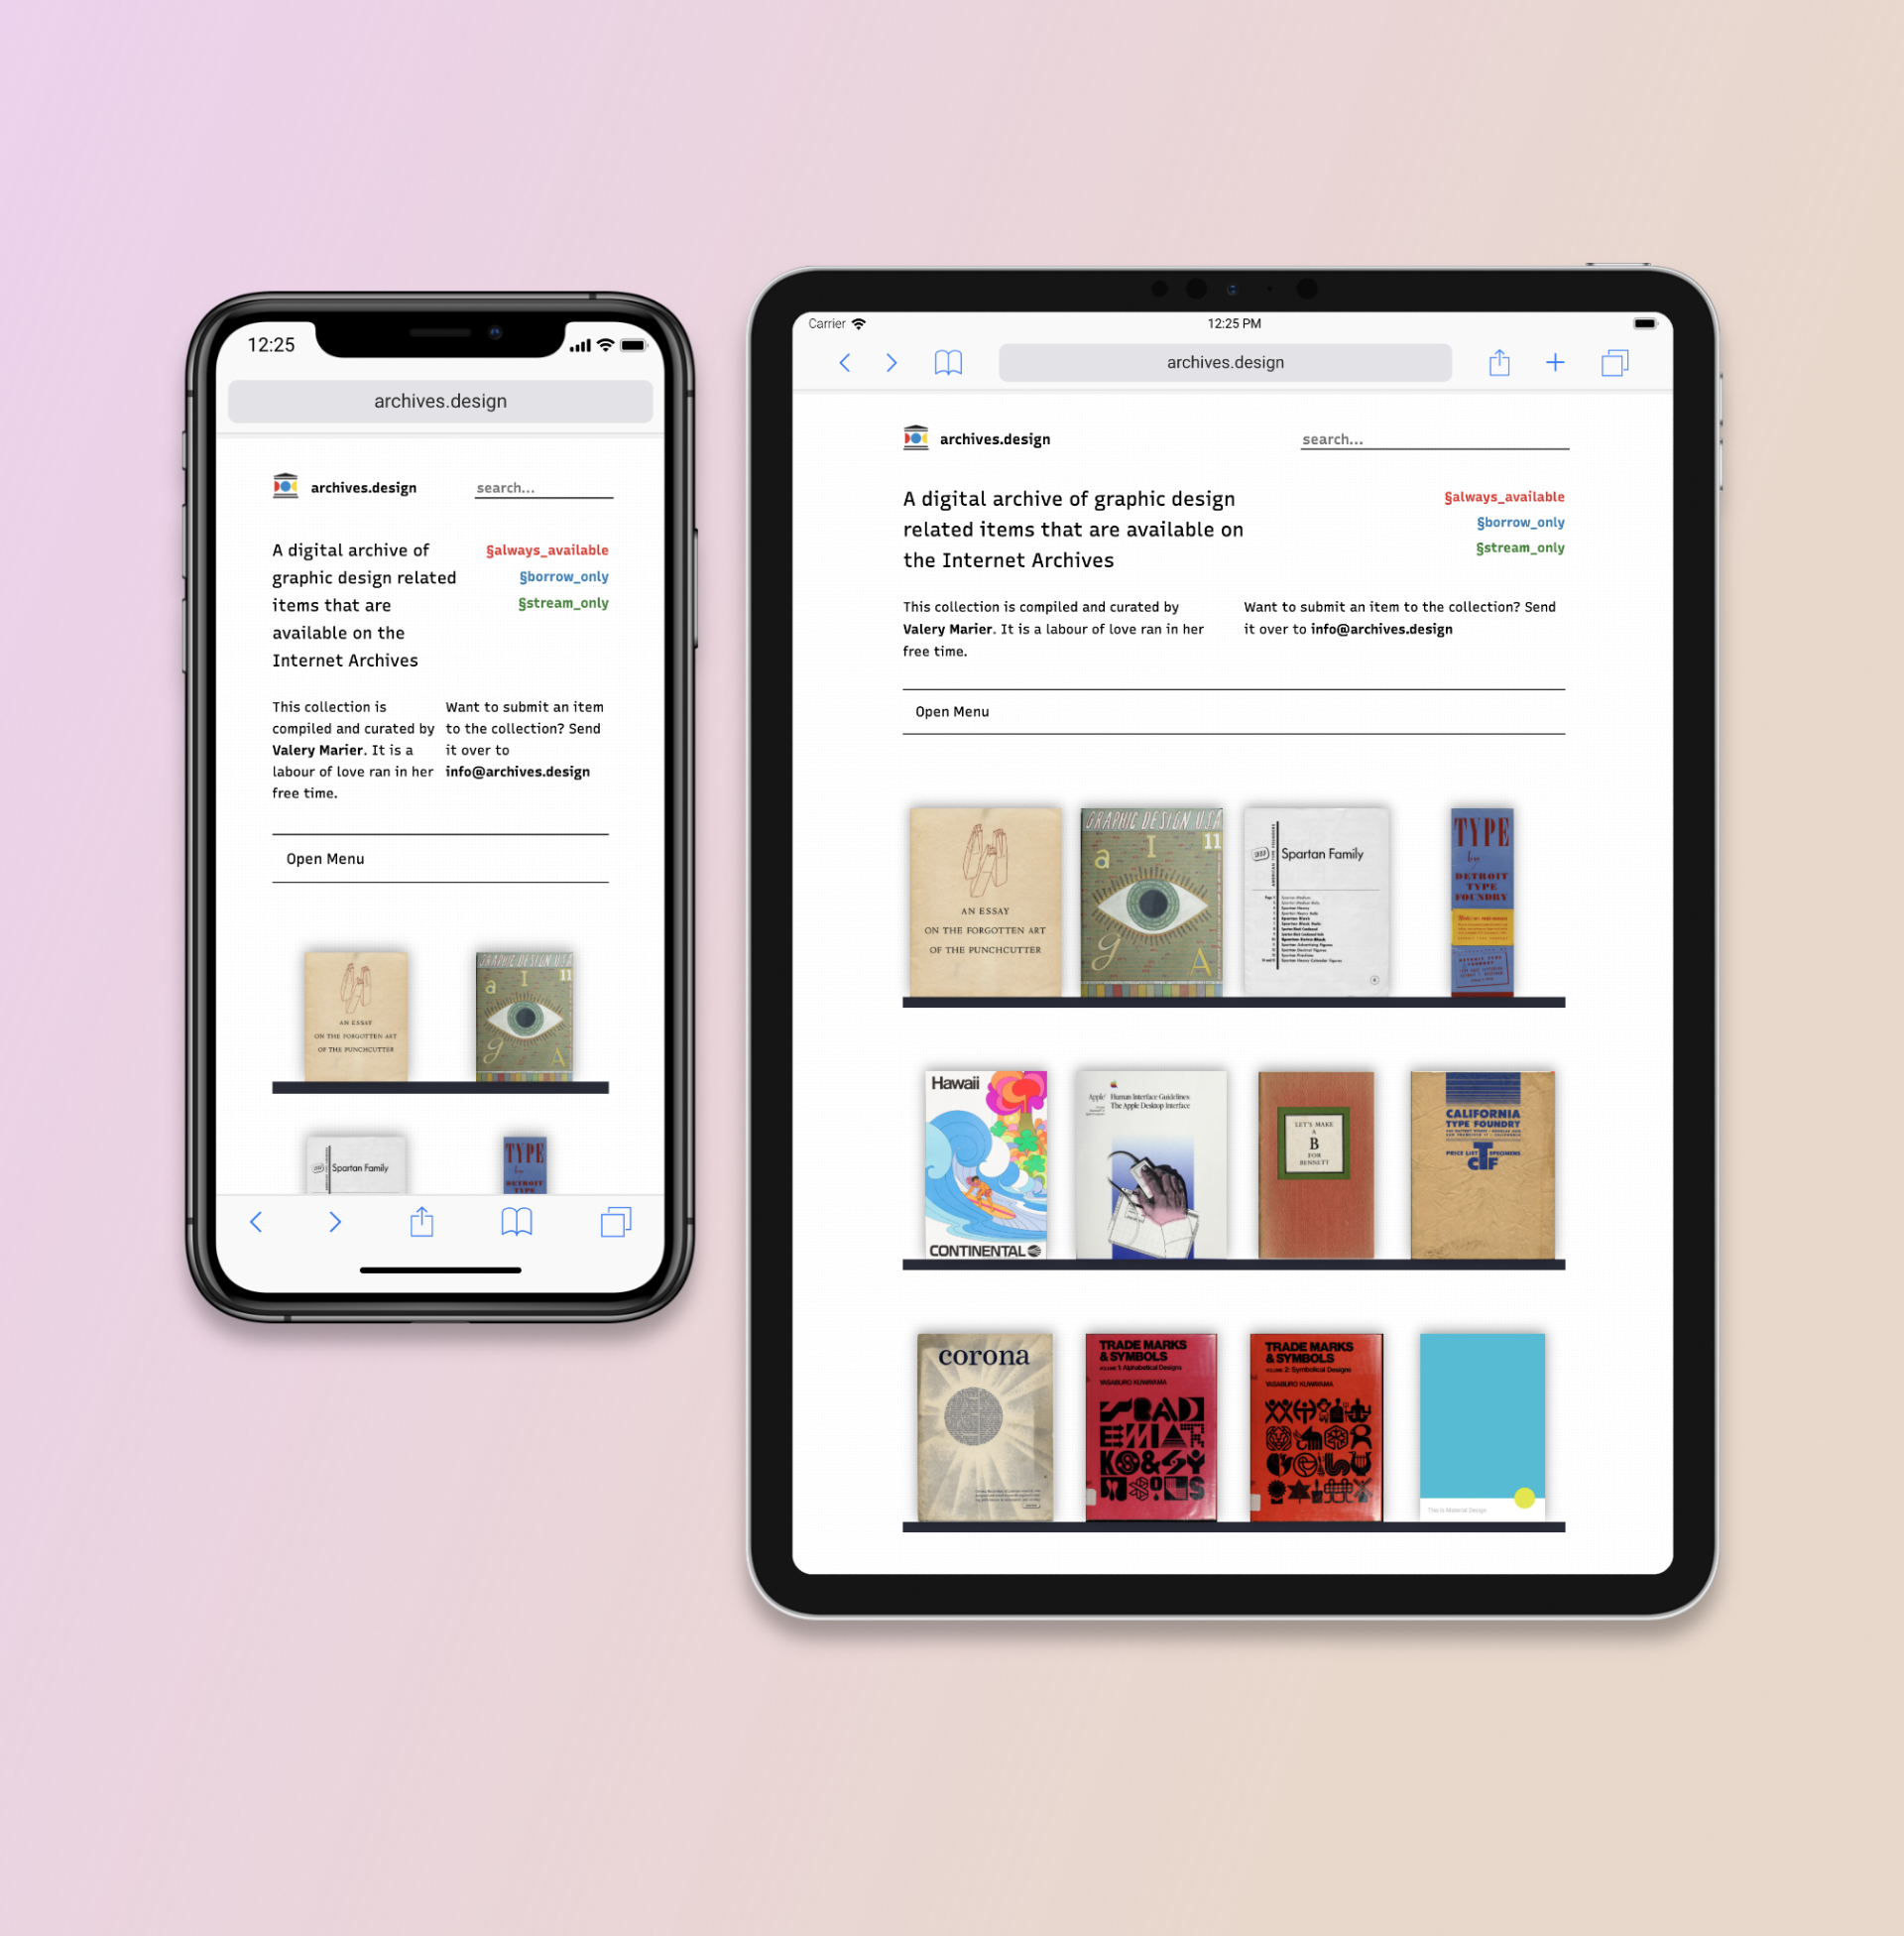 A photo of the archives.design homepage displayed on an iPhone (left) and iPad (right).